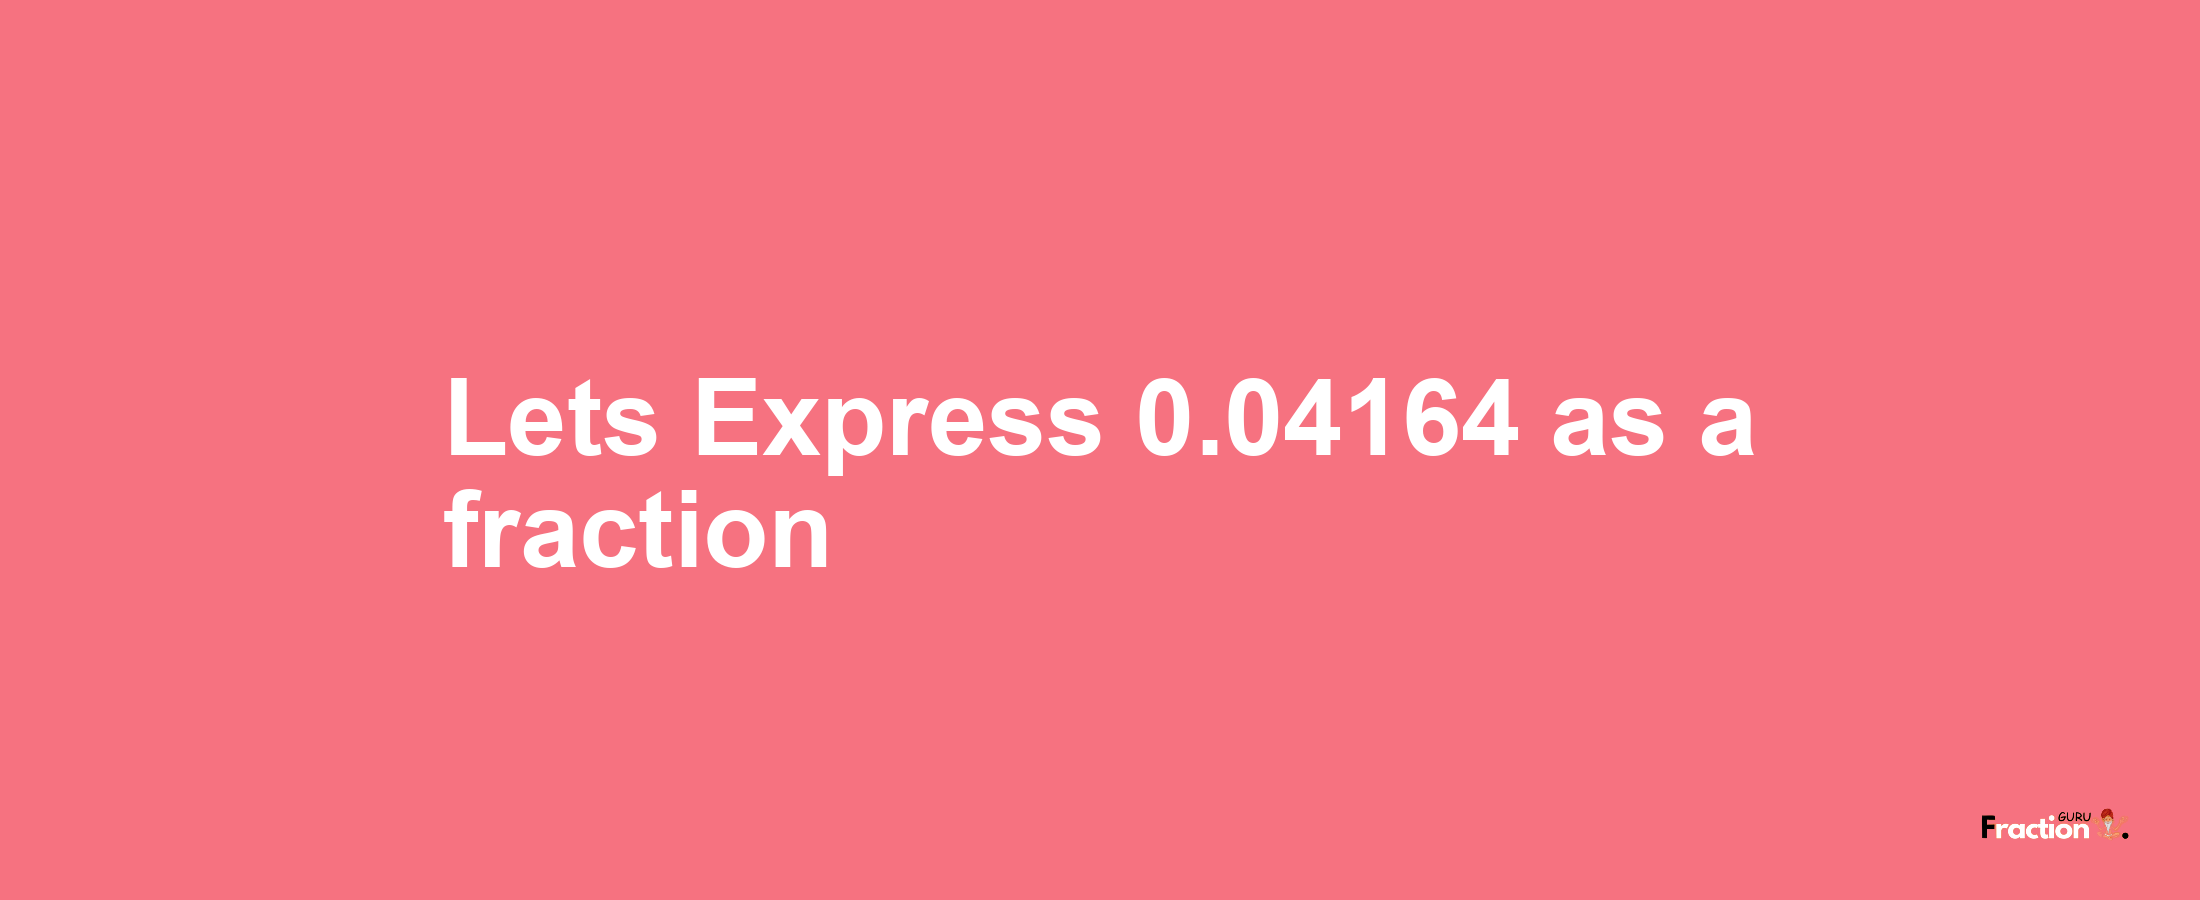 Lets Express 0.04164 as afraction